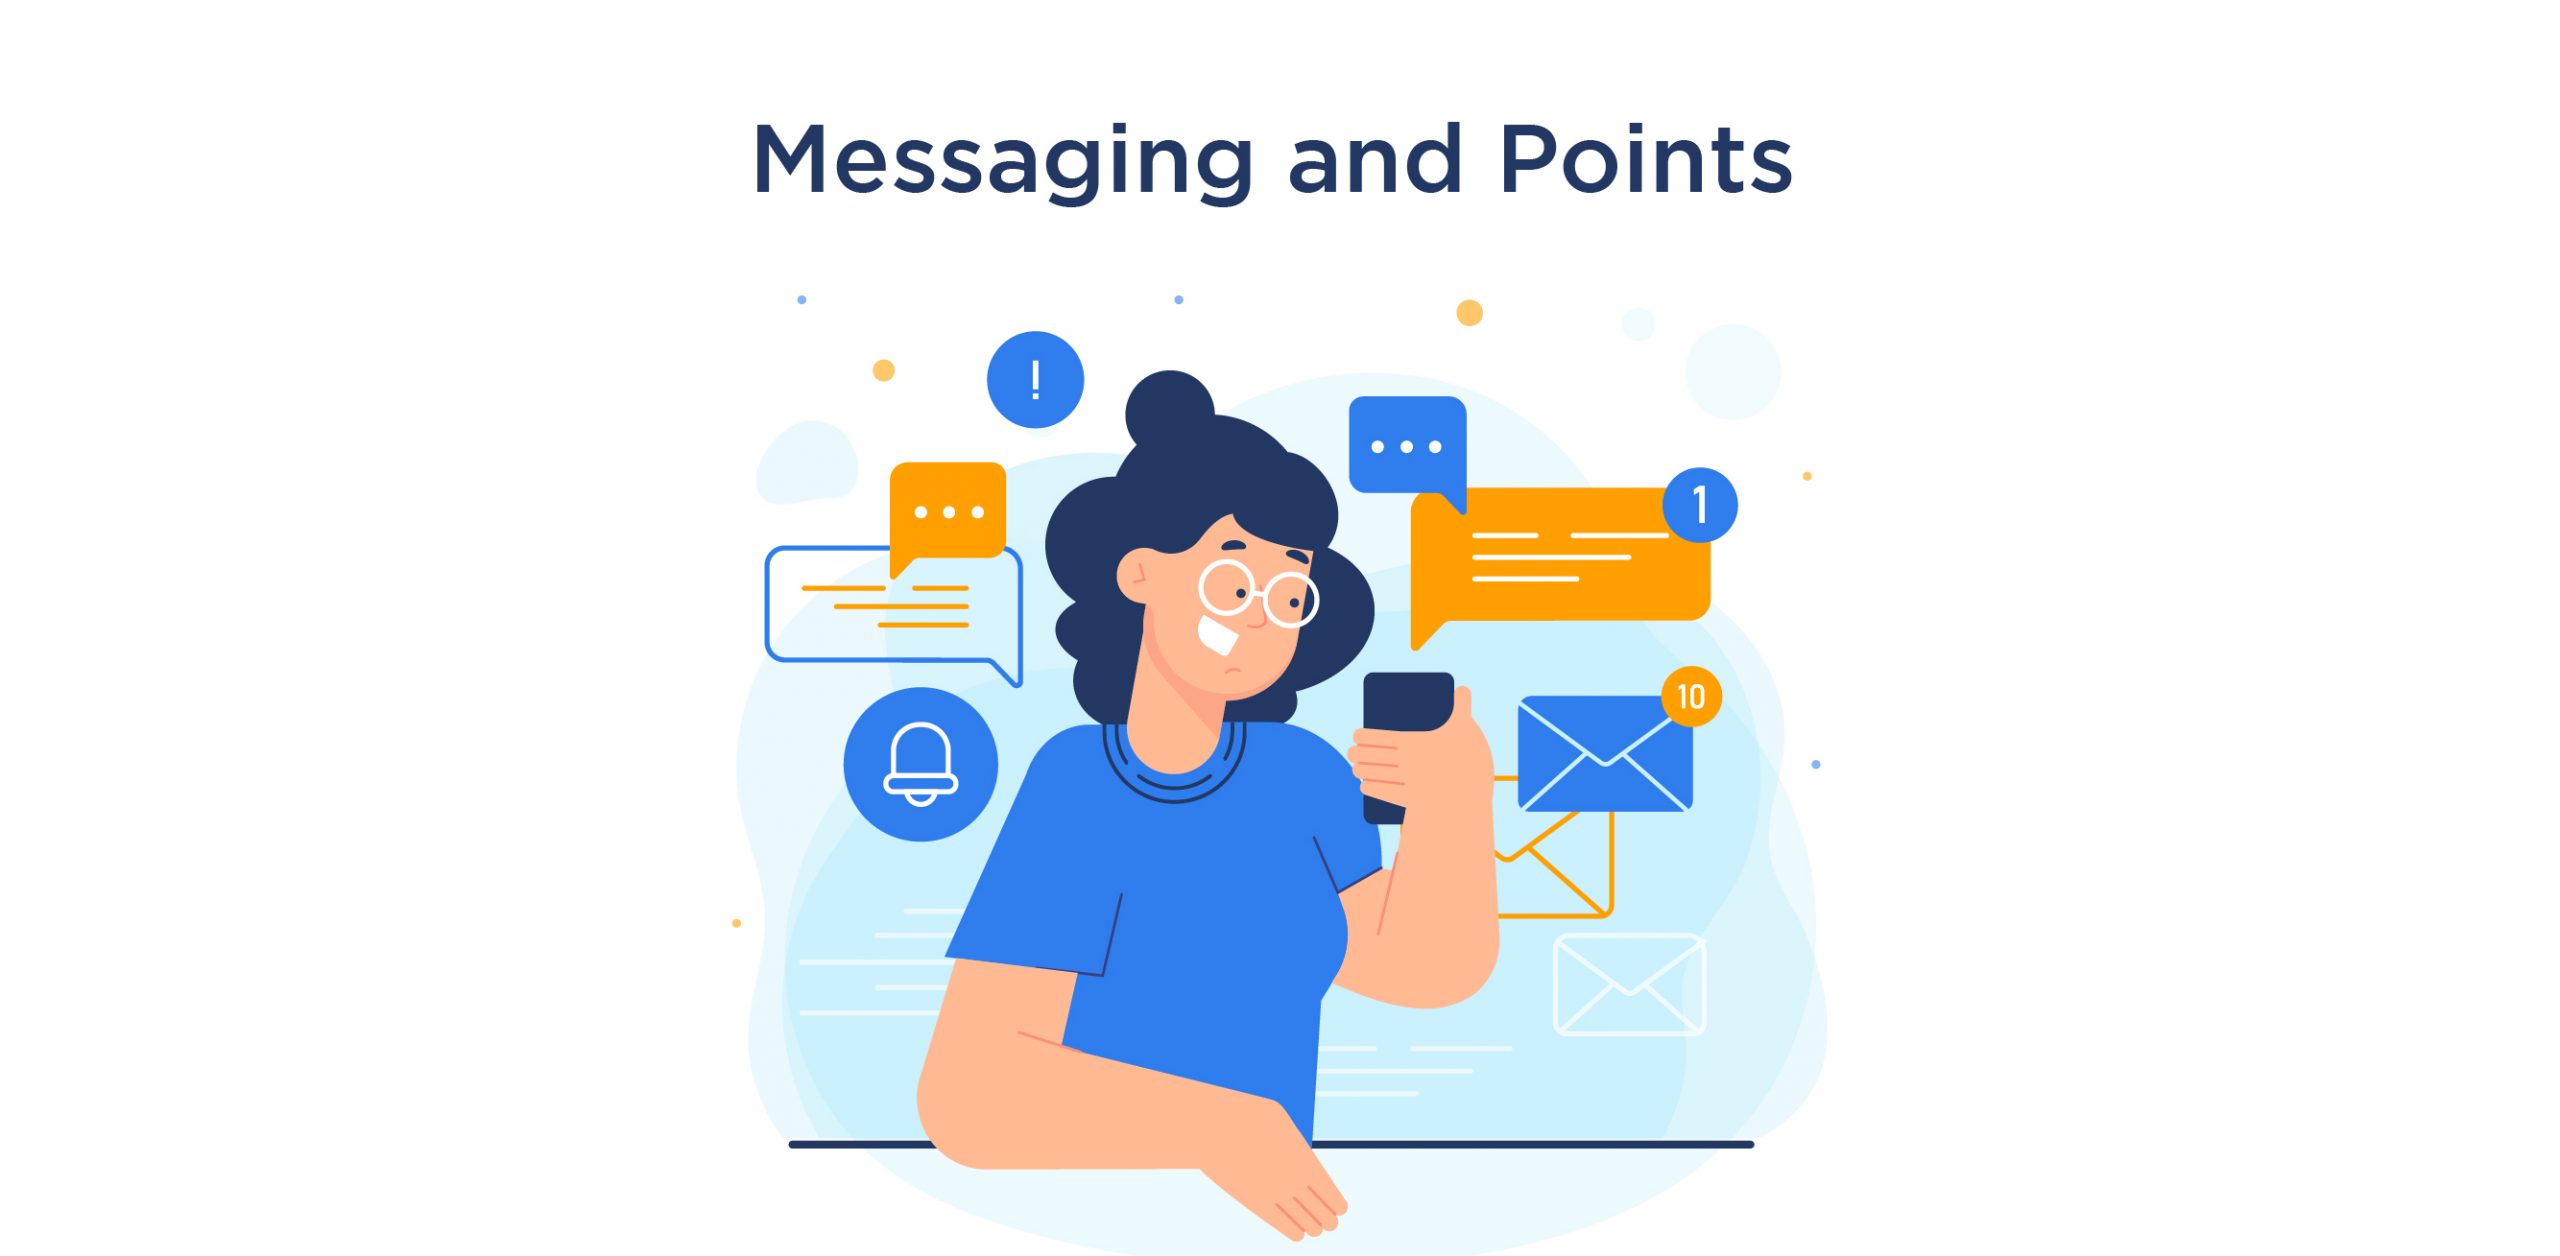 Messaging and Points